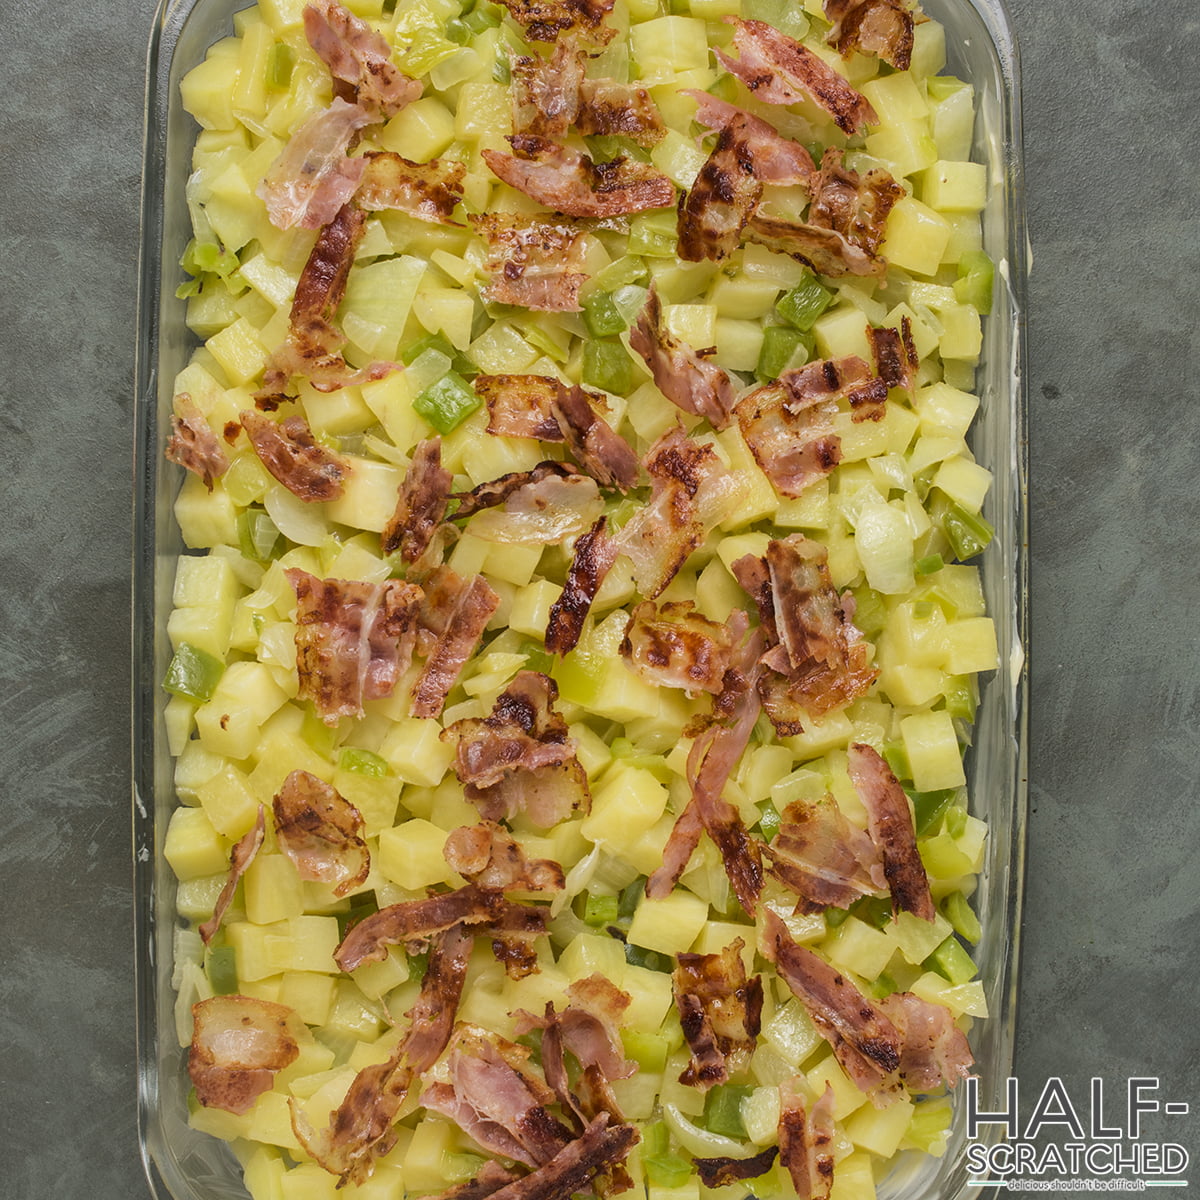 Bacon with hashbrowns in baking dish